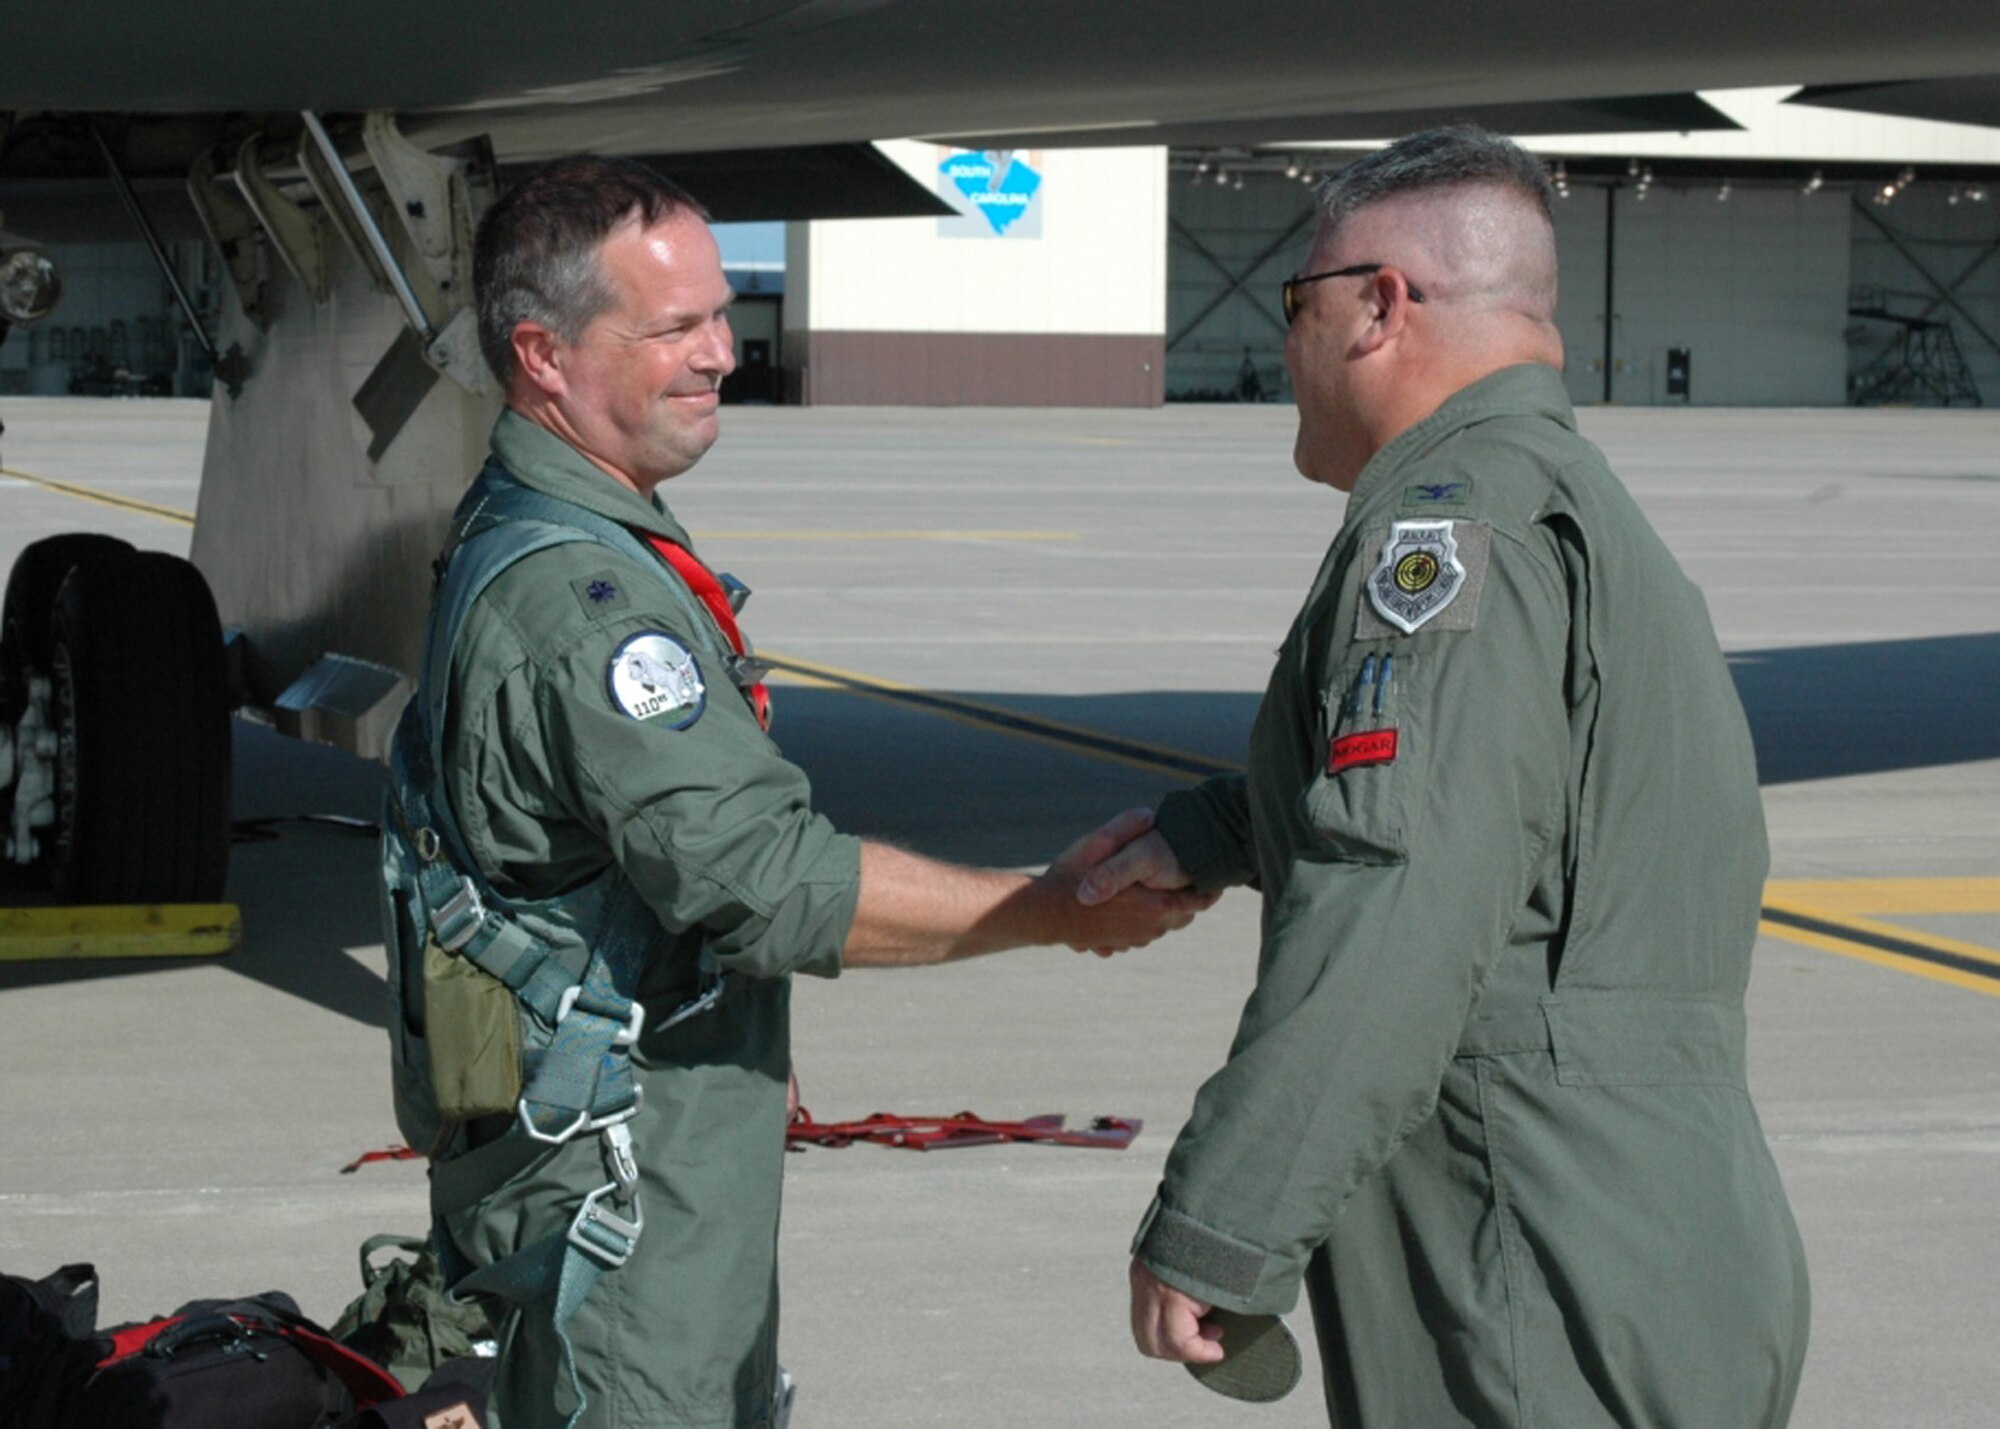 Lt. Col. Ken "Willie B" Eaves, 131st Operations Group commander, congratulates Lt. Col. Michael “Farmer” Pyburn on accomplishing 1000 B-2 flying hours at Whiteman AFB, Mo, August 15.  Pyburn joins an elite group of 131st Bomb Wing Missouri Air National Guard B-2 pilots: Lt. Col. Michael Means who achieved this milestone almost three years ago while on active duty; Lt. Col. Rhett Binger, June 2009;     Maj. Jared Kennish, Oct.2009; and  Maj. John Avery, March 2010.  (Air Force Photo by Technical Sgt. Chris Boehlein. RELEASED)